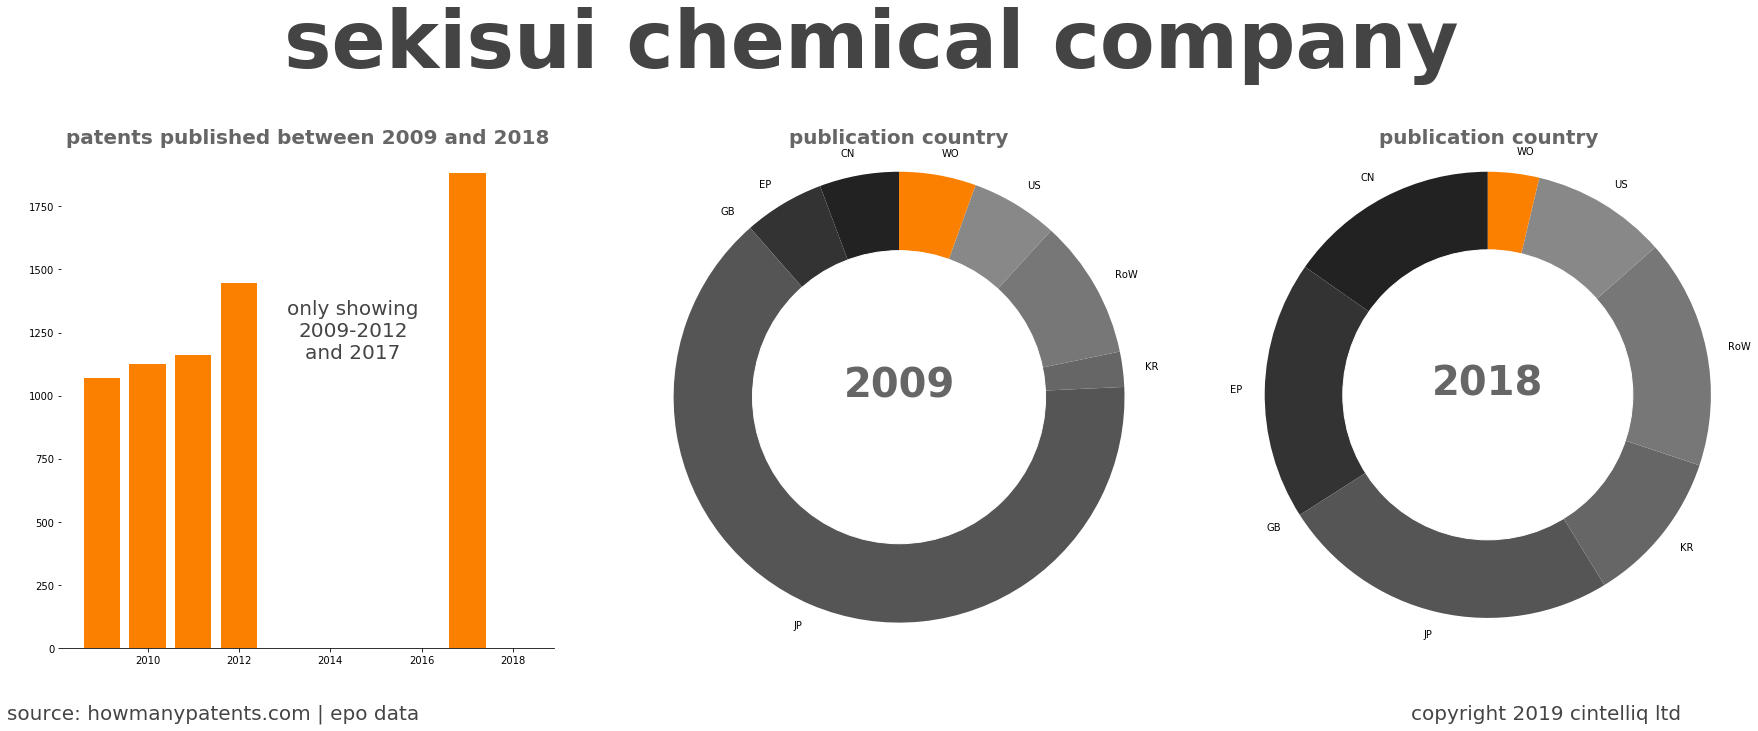 summary of patents for Sekisui Chemical Company